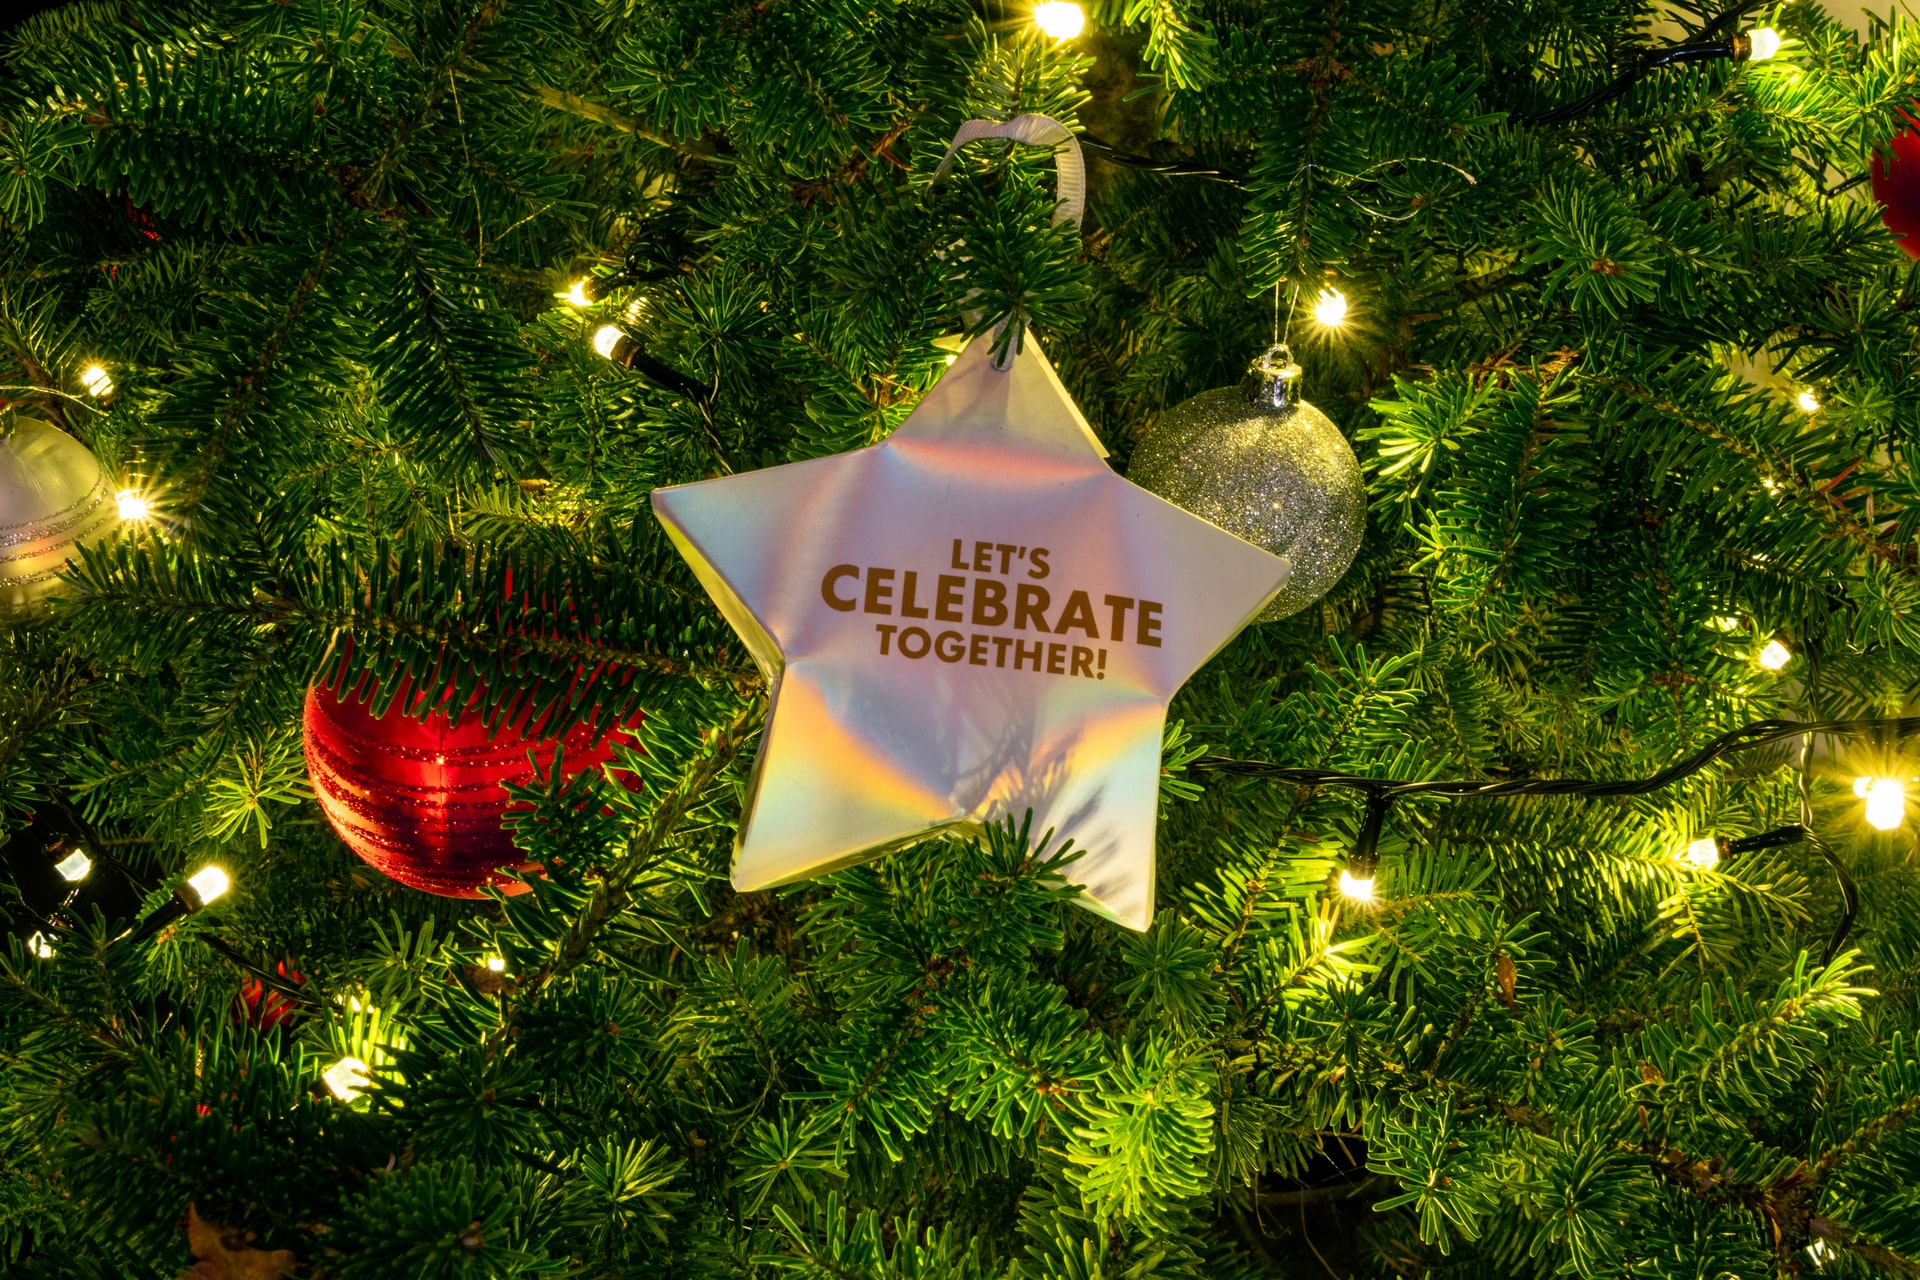 Gold star in a Christmas tree that reads 'let's celebrate together'